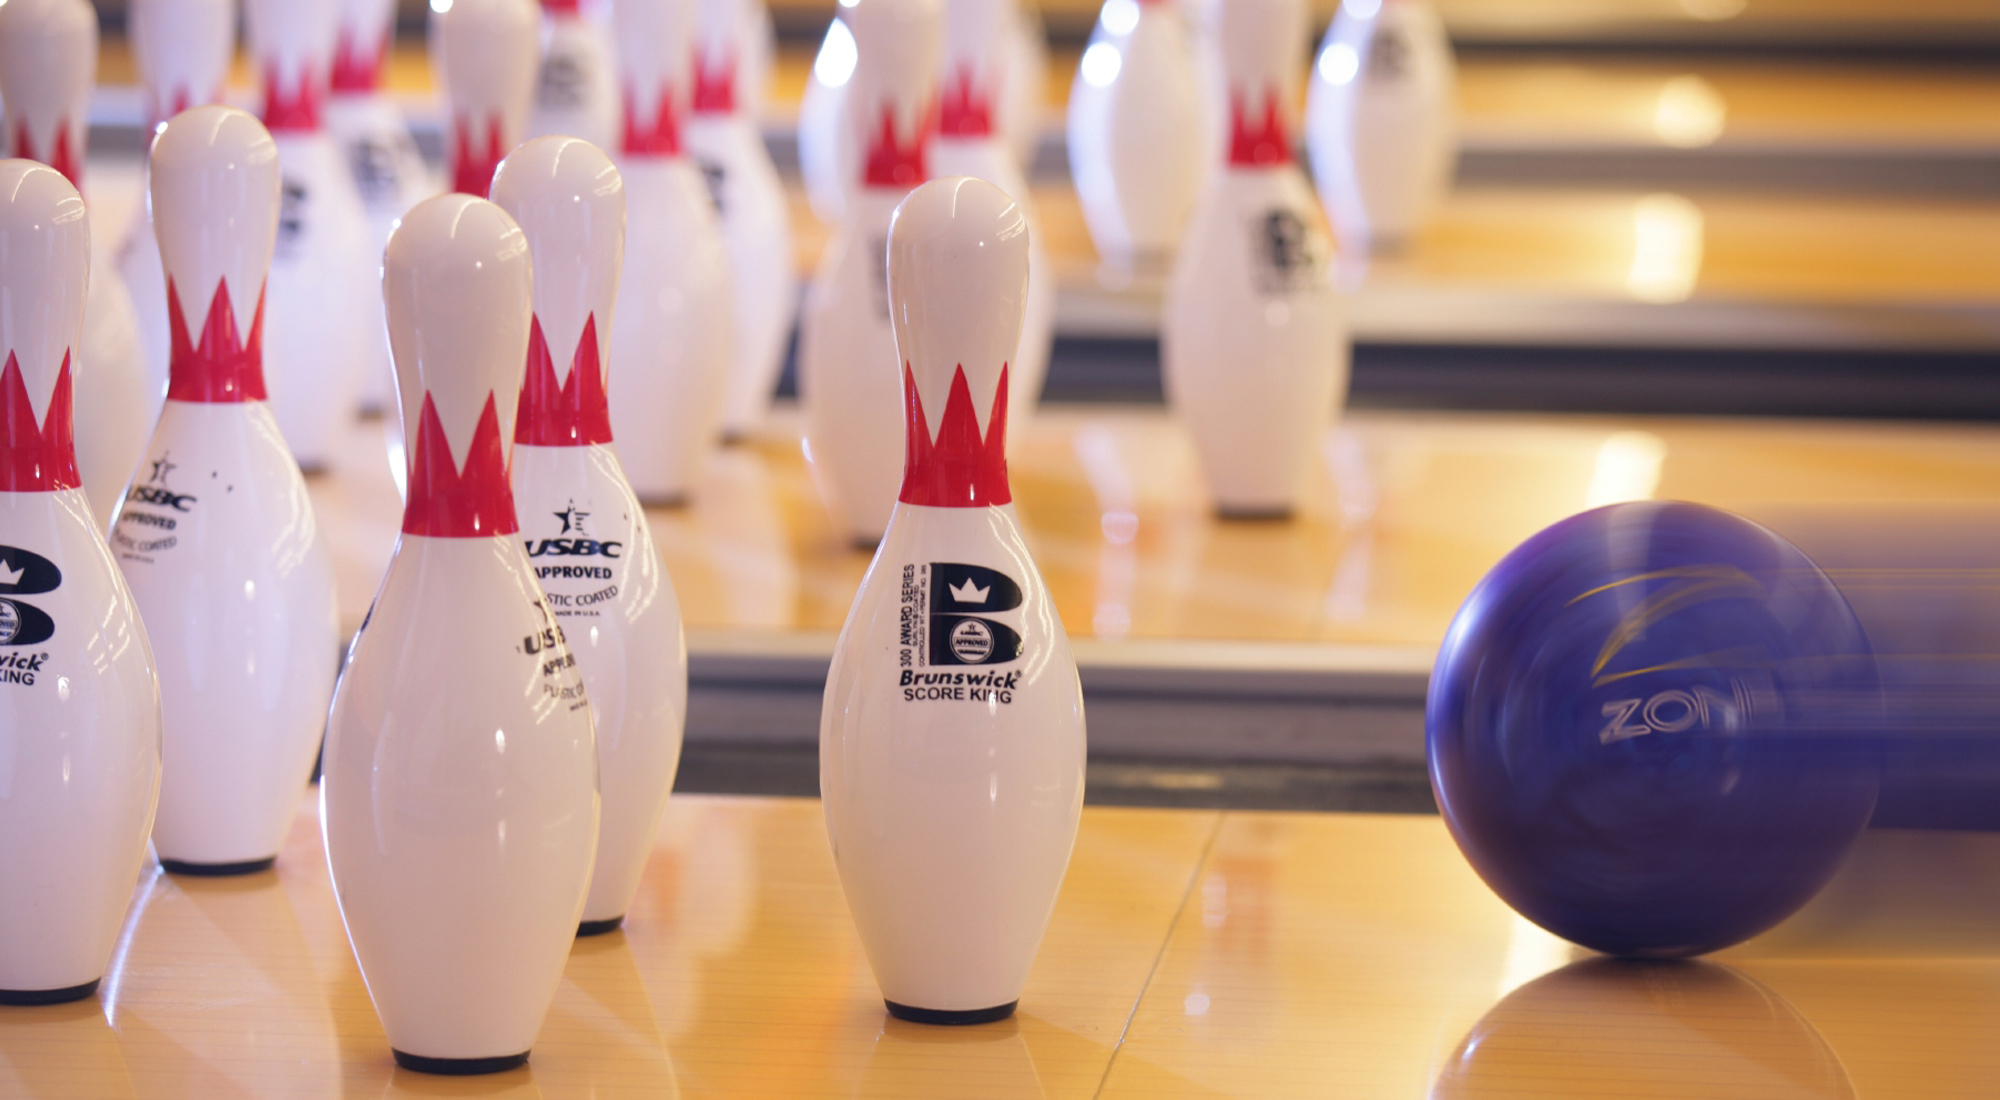 Bowling Wallpapers Images Photos Pictures Backgrounds2000 x 1100